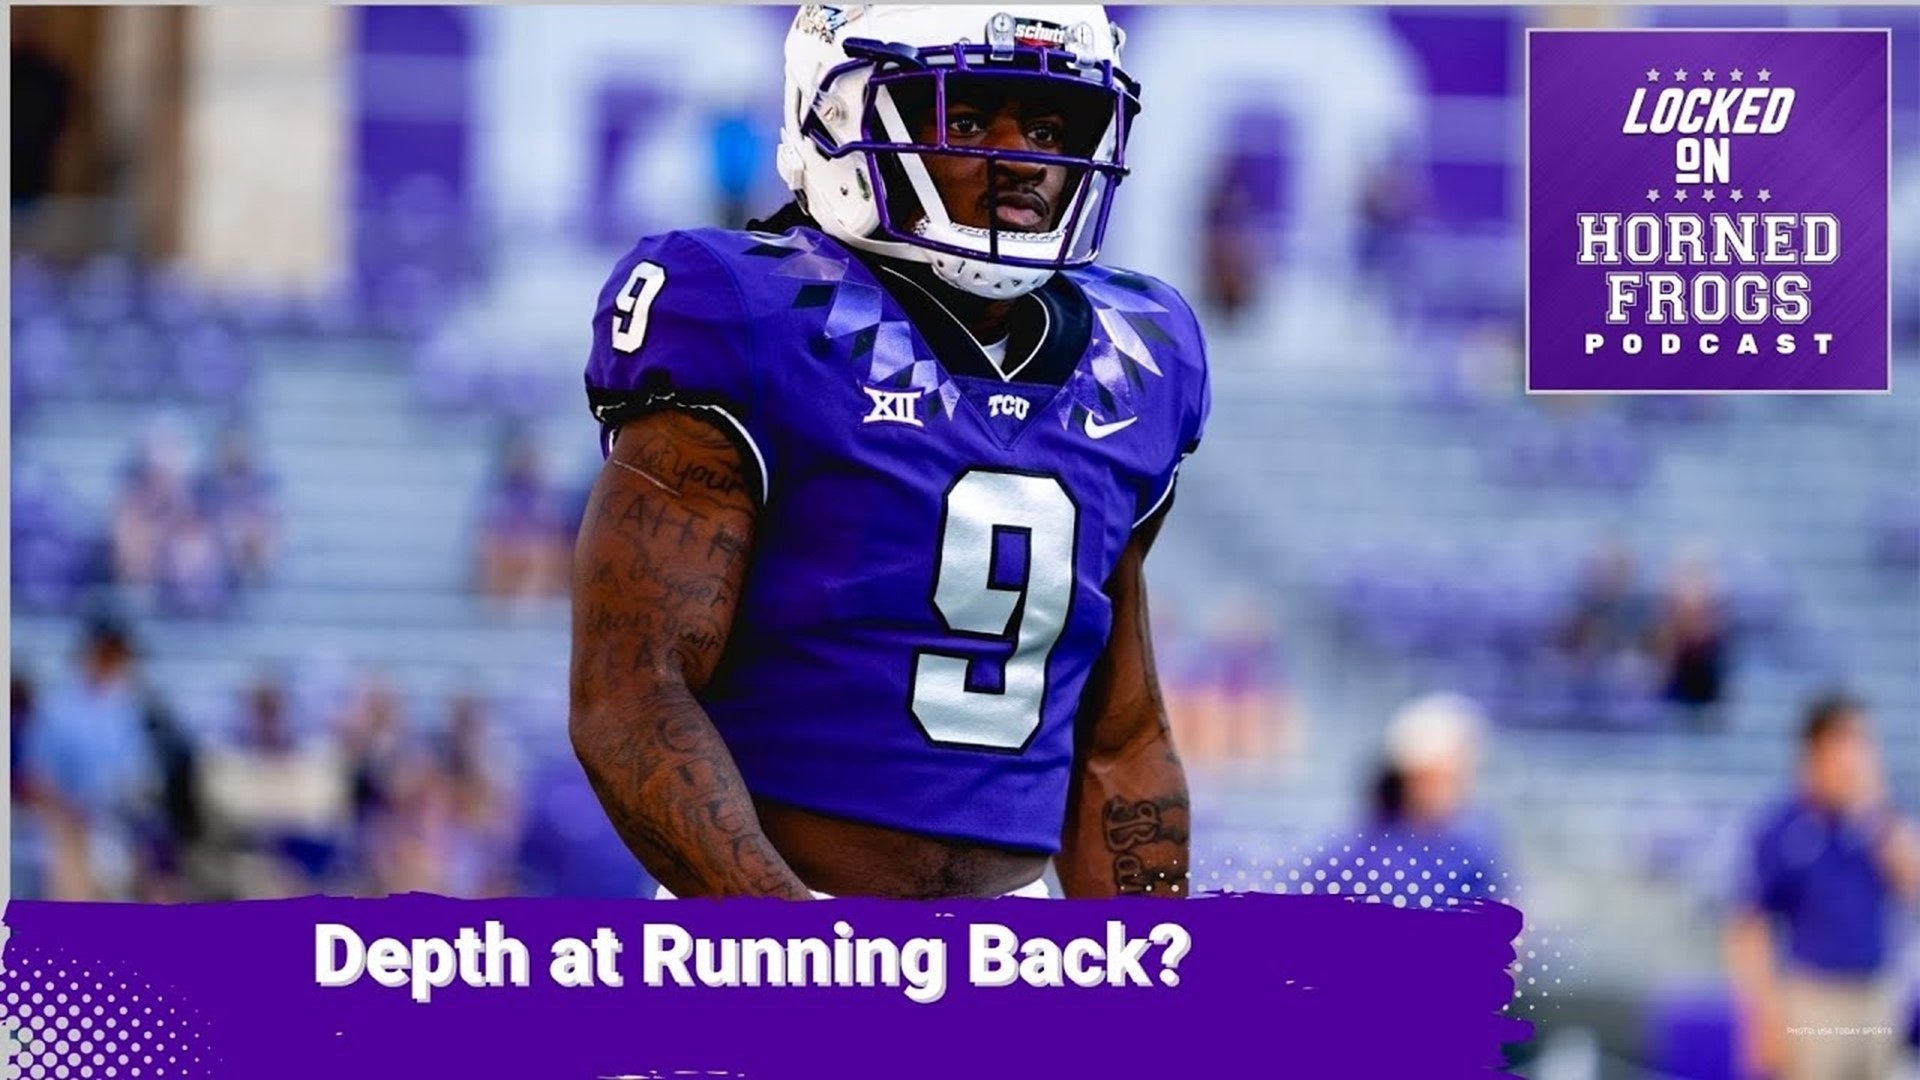 Does TCU have some serious depth at the RB position this year? Plus, we discuss one of the most interesting players in this incoming freshman class